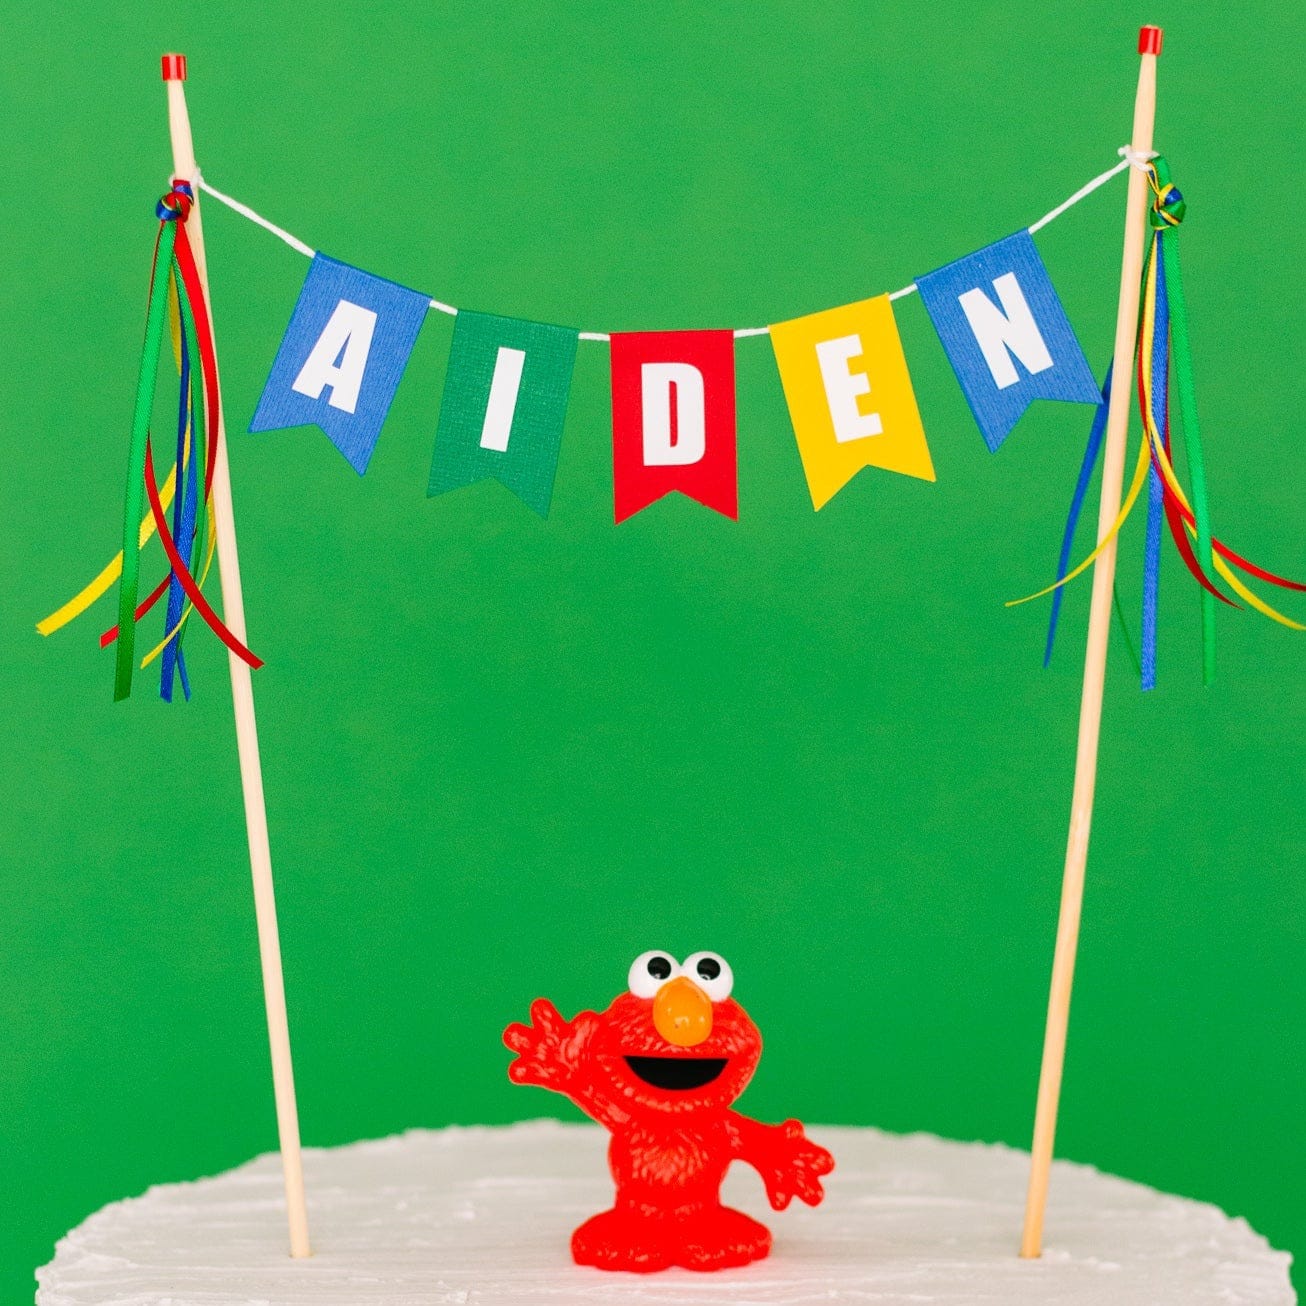 multi-color personalized name cake topper in blue, green, red and yellow shown with an Elmo figure on top of the cake